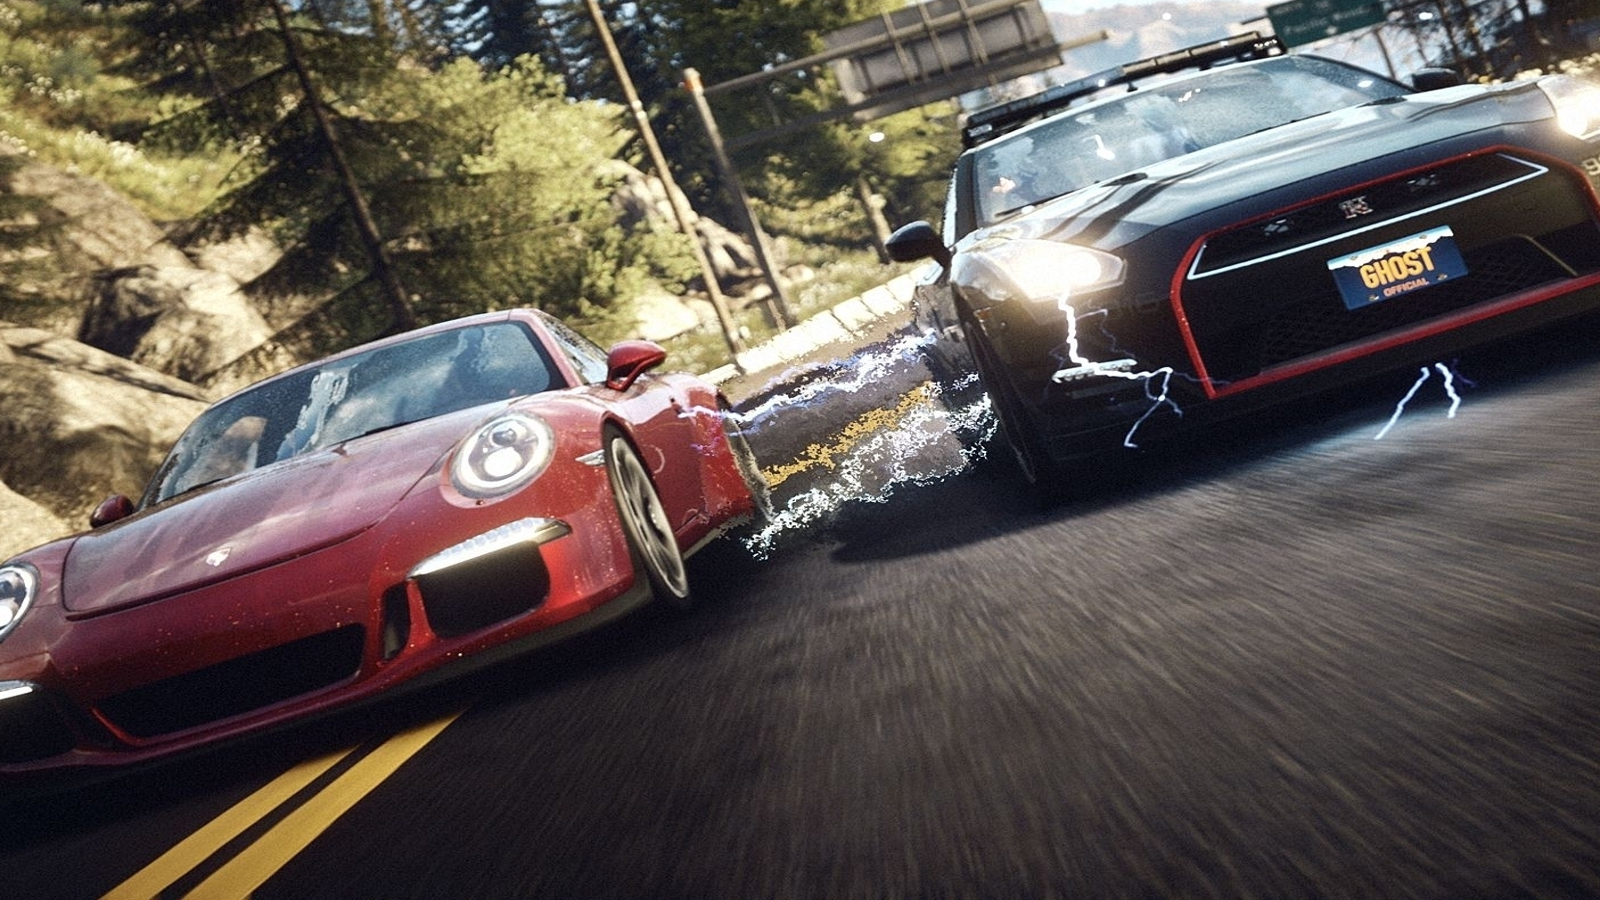 Review: Need For Speed: Rivals